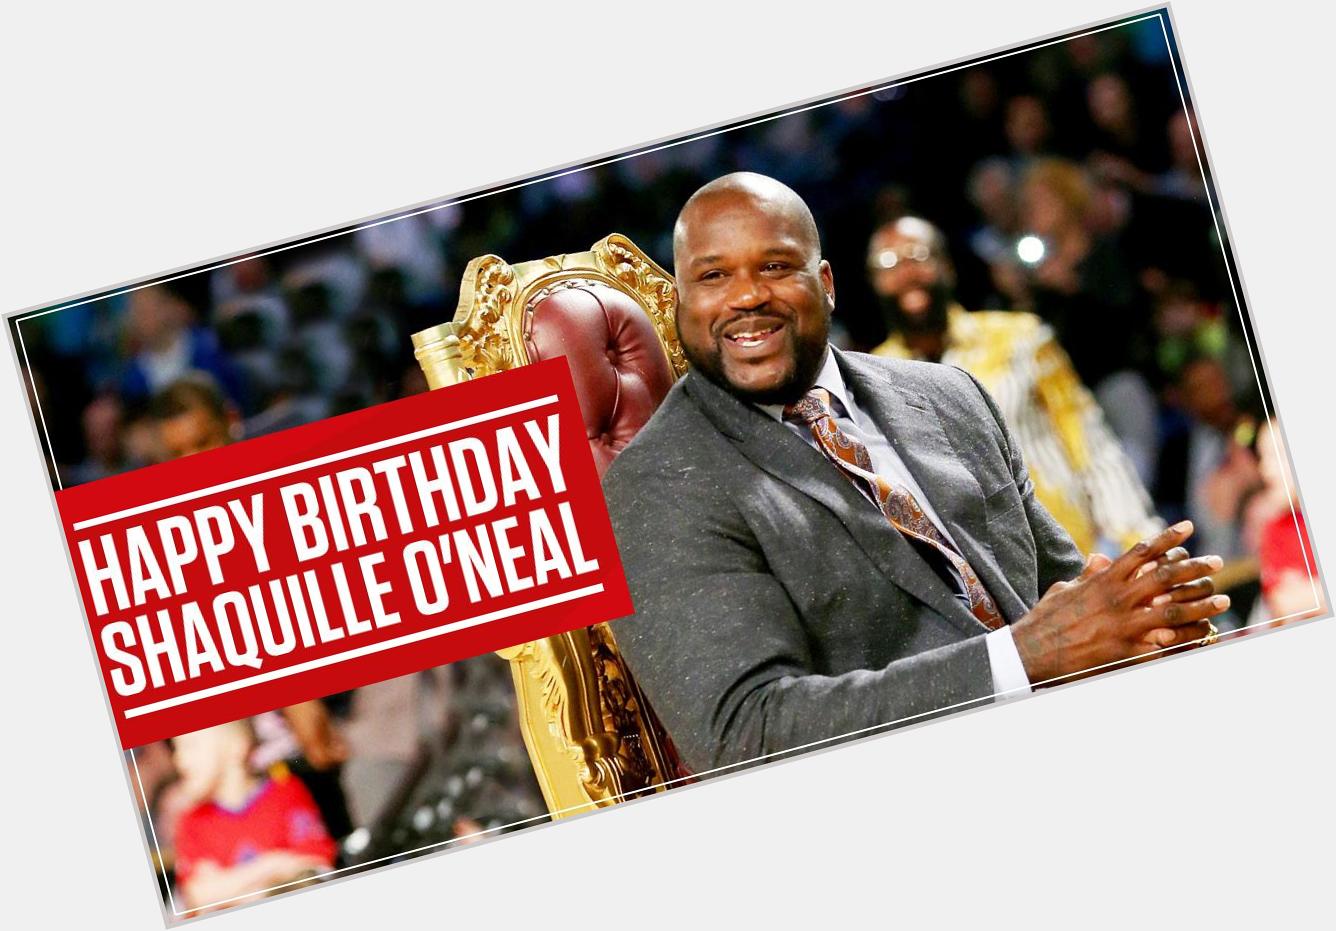 King of the court for 19 years, it\s a very happy birthday to NBA superstar Shaquille O\Neal! 